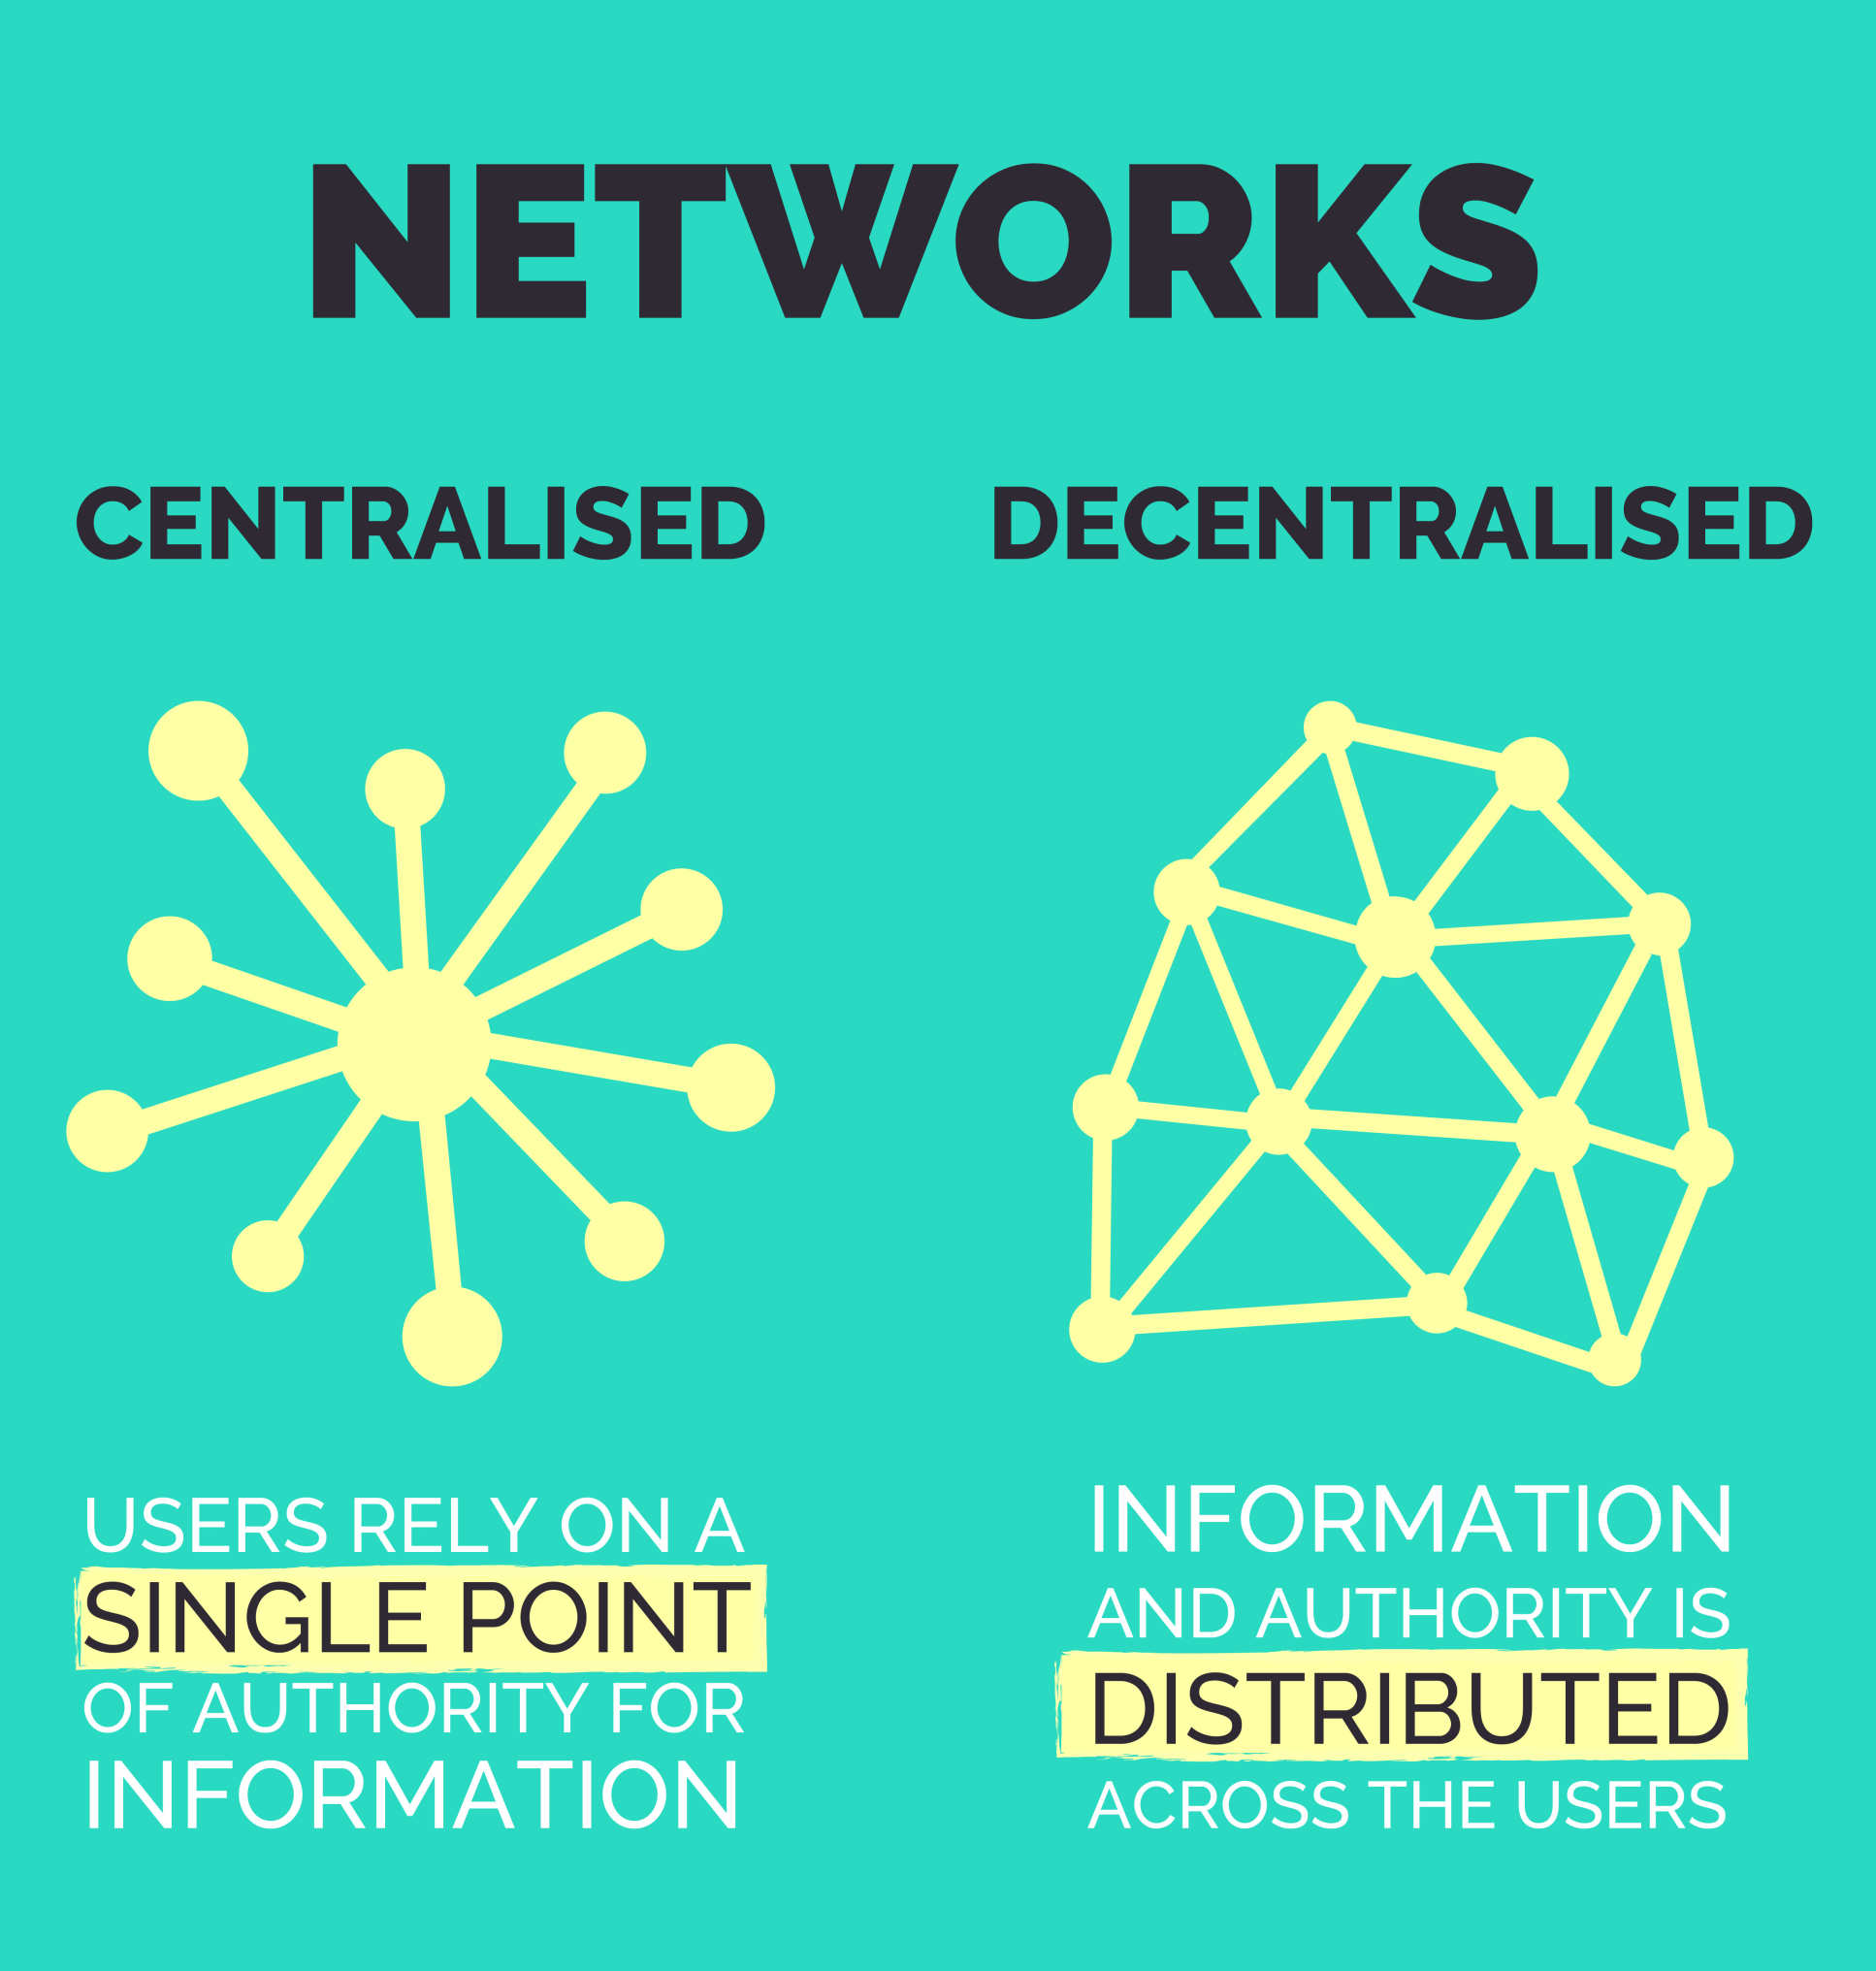 Illustration caption: Networks, centralised (users rely on a single point of authority for information); decentralised (information and authority is distributed across the users)